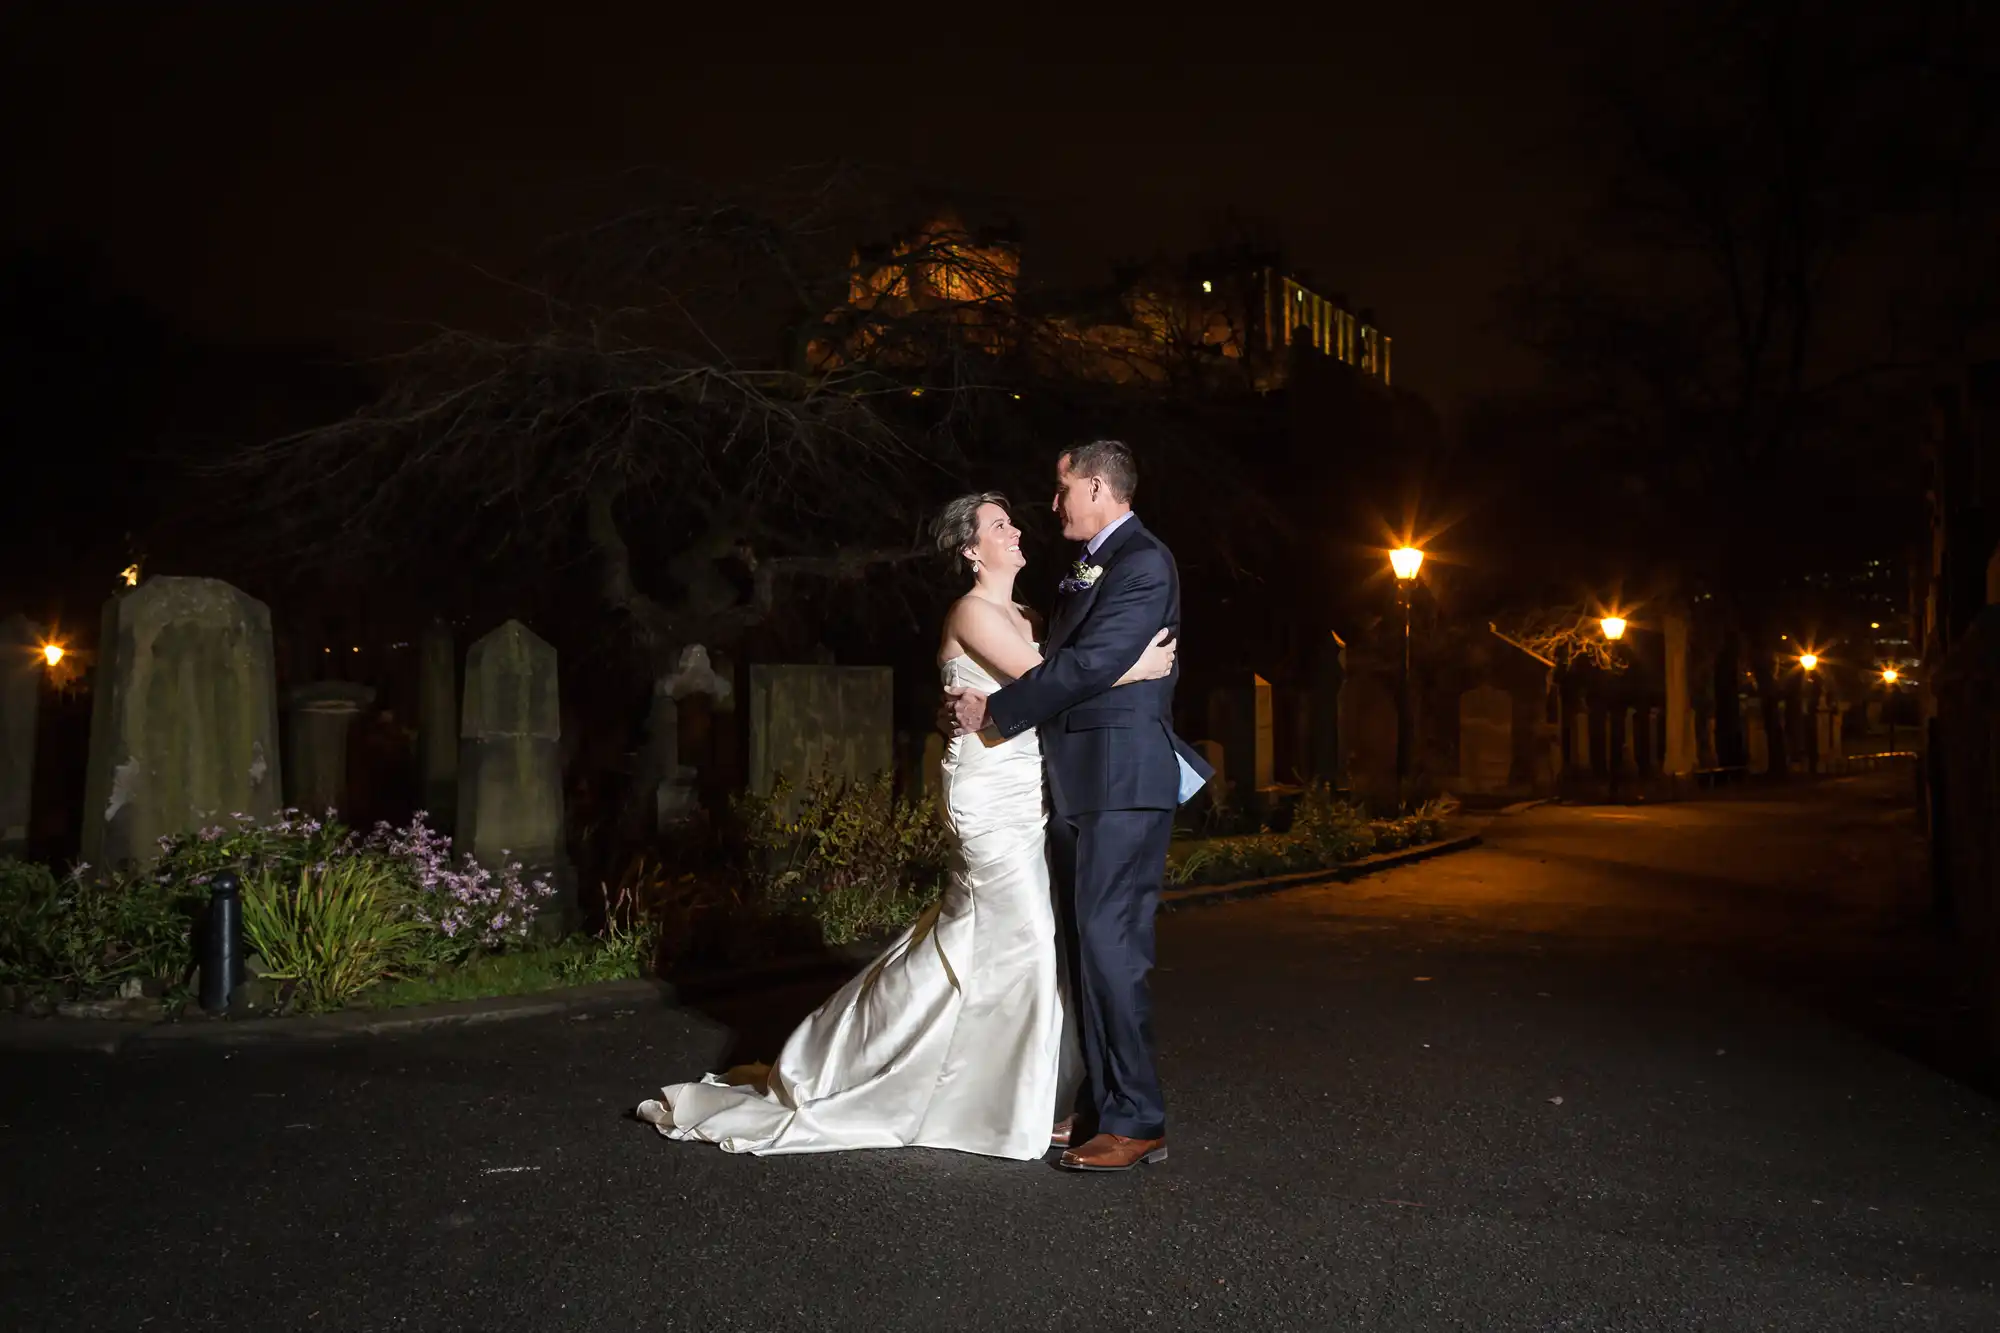 A bride and groom embrace at night in a lit cemetery, with headstones and illuminated paths surrounding them.